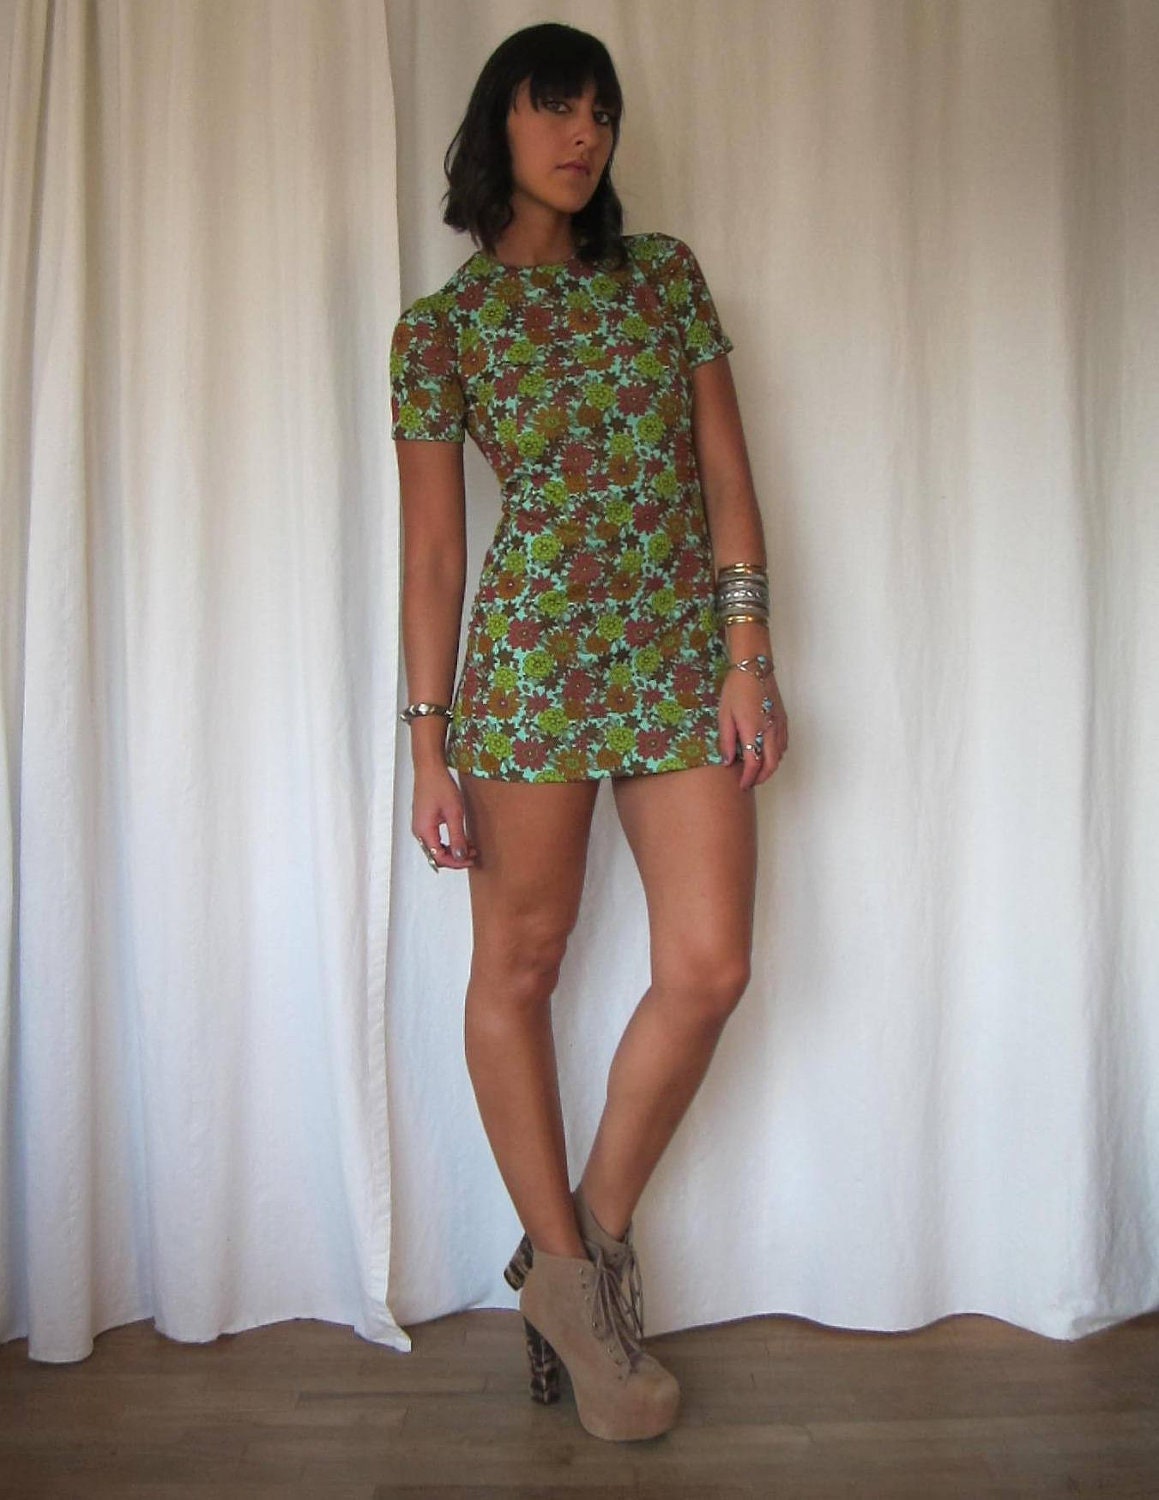 Vintage 60s Mod Floral Micro Mini Dress By Shopgypsyeyes On Etsy